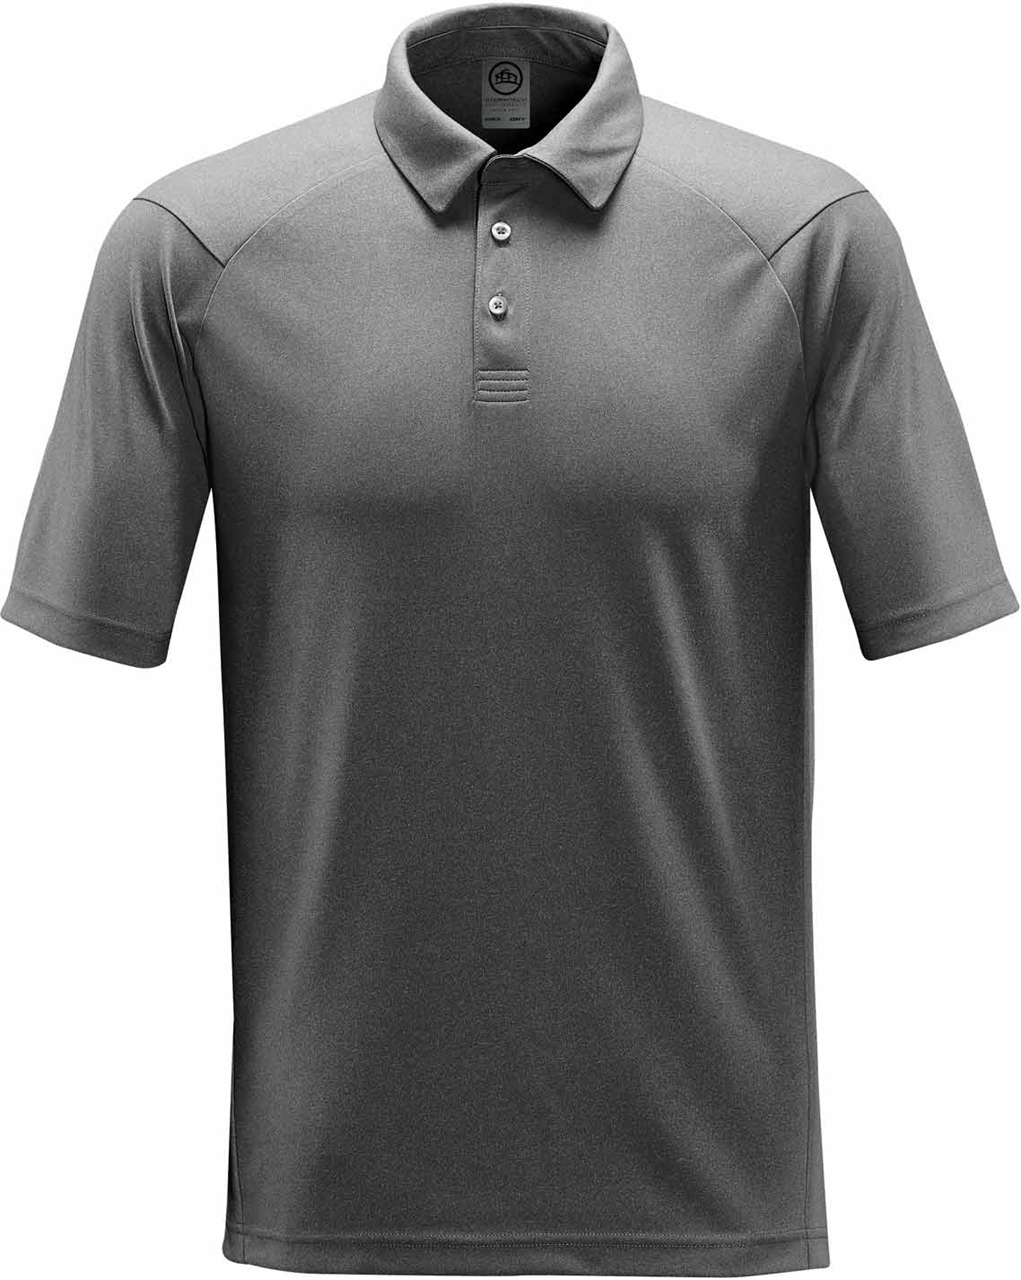 Picture of Stormtech Men's Mistral Heathered Polo